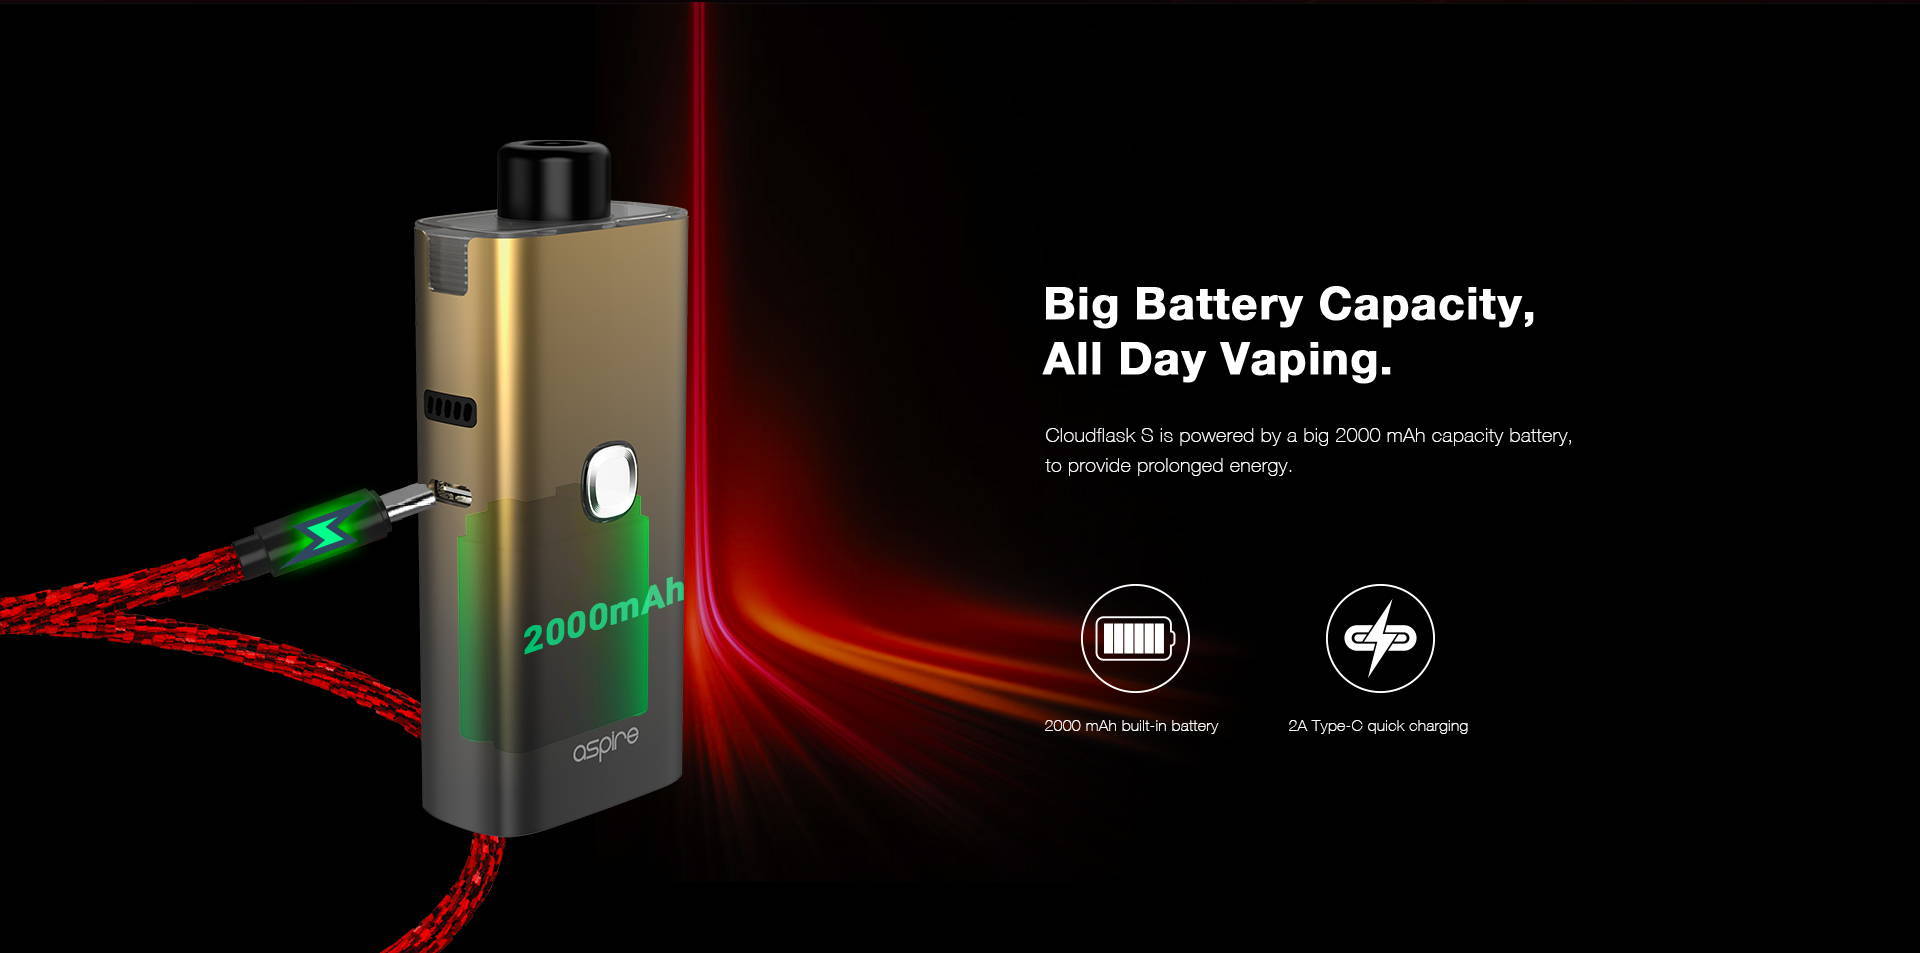 Cloudflask S is powered by big 2000 mAh capacity battery,  to provide prolonged energy.